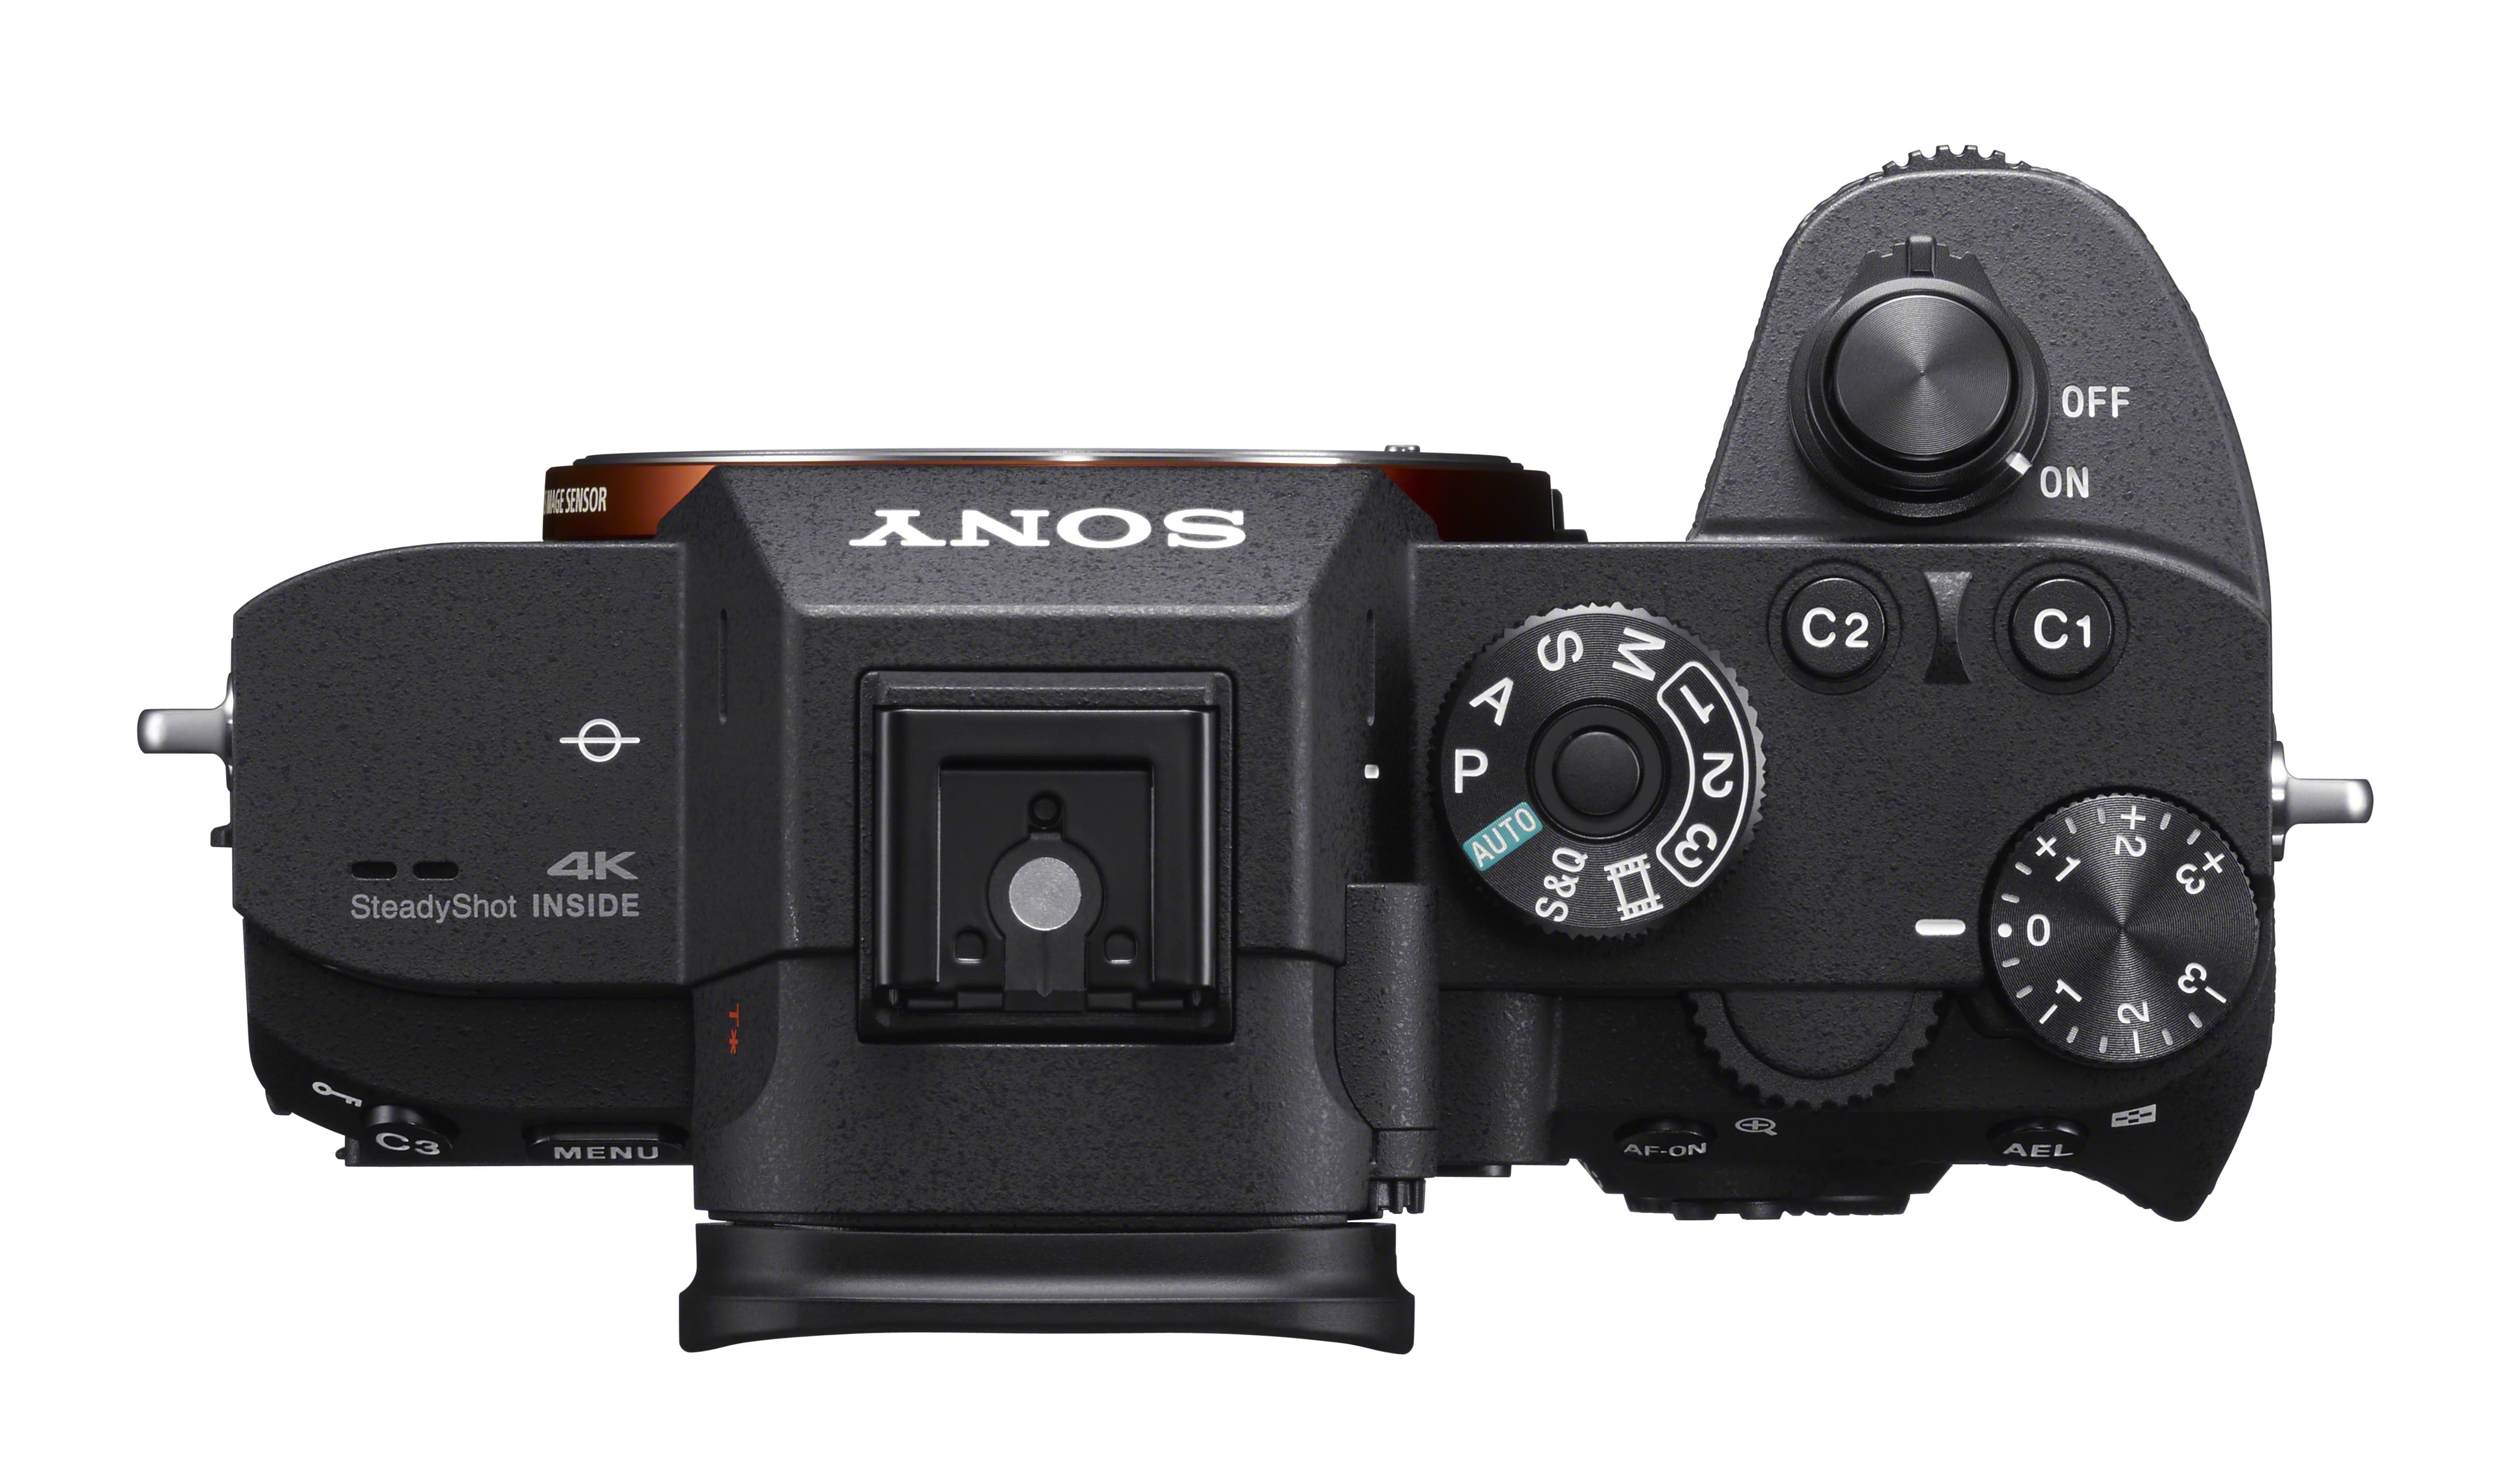 Sony a7R III Mirrorless Camera: 42.4MP Full Frame High Resolution  Interchangeable Lens Digital Camera with Front End LSI Image Processor, 4K  HDR Video